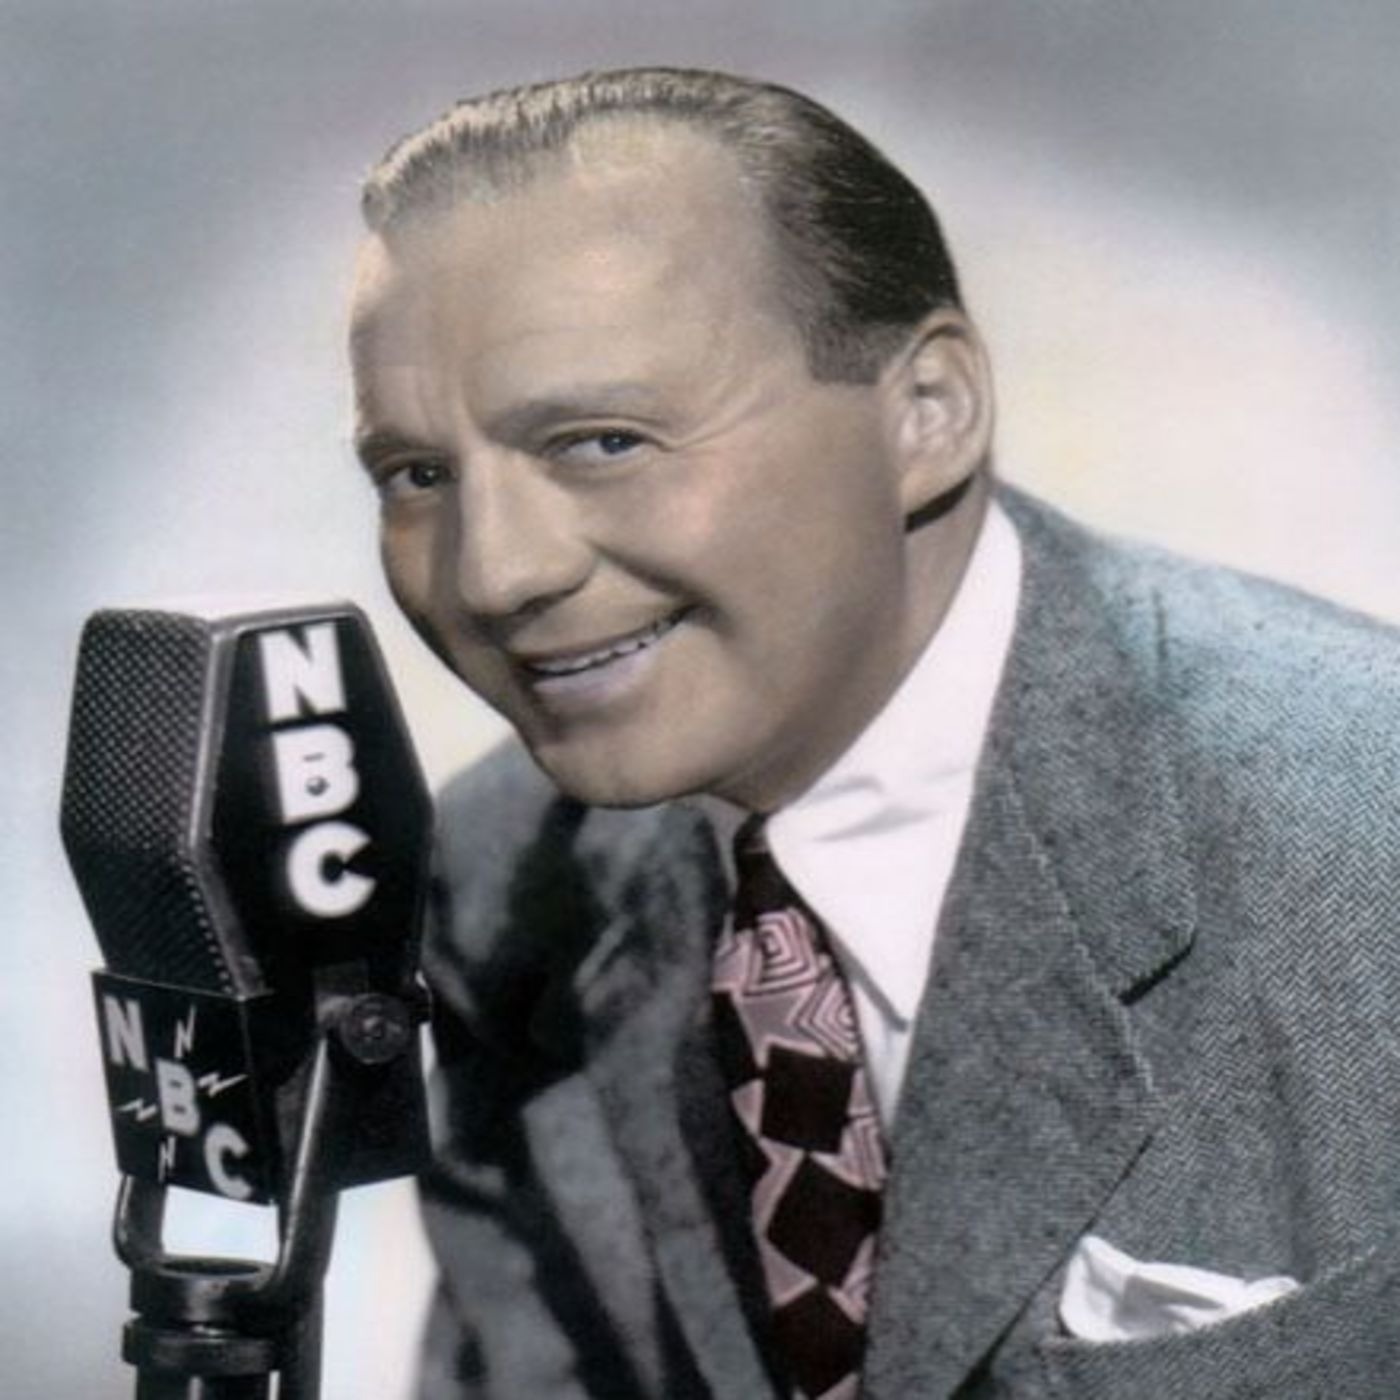 Jack Benny 51-04-22 (767) The Irs Visits Jack - He and the Cast Go to the Circus